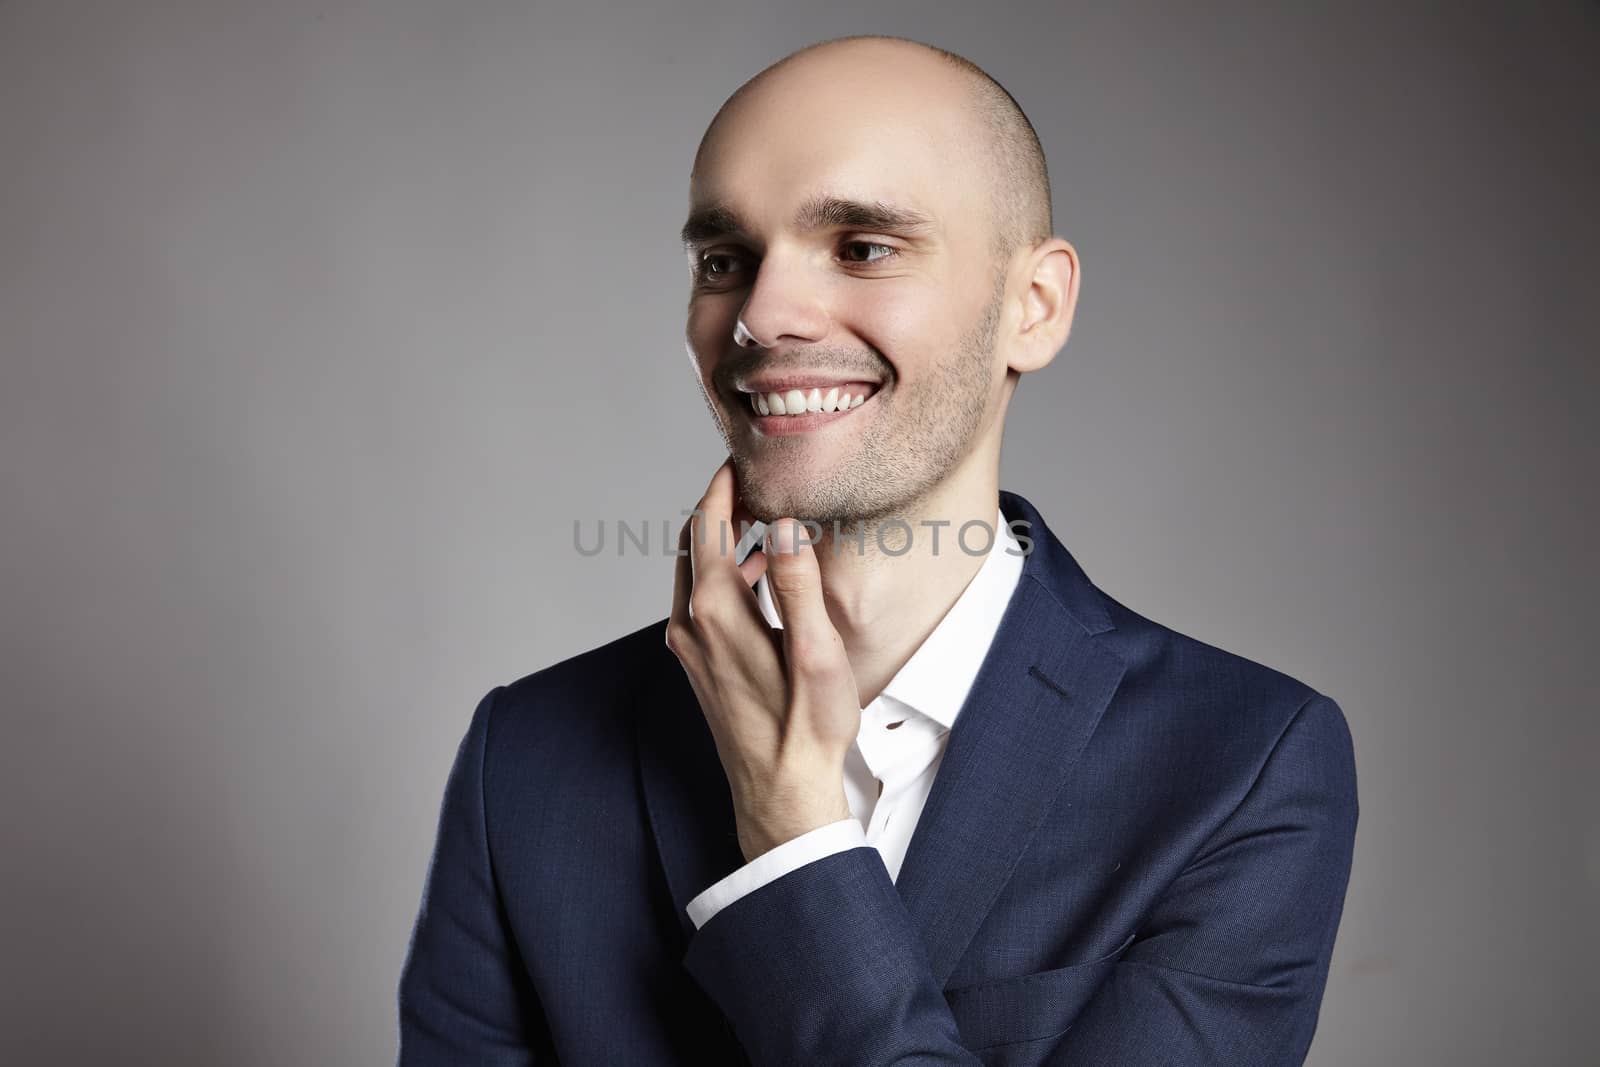 Portrait of a smiling man looking right. He is stroking his chin.